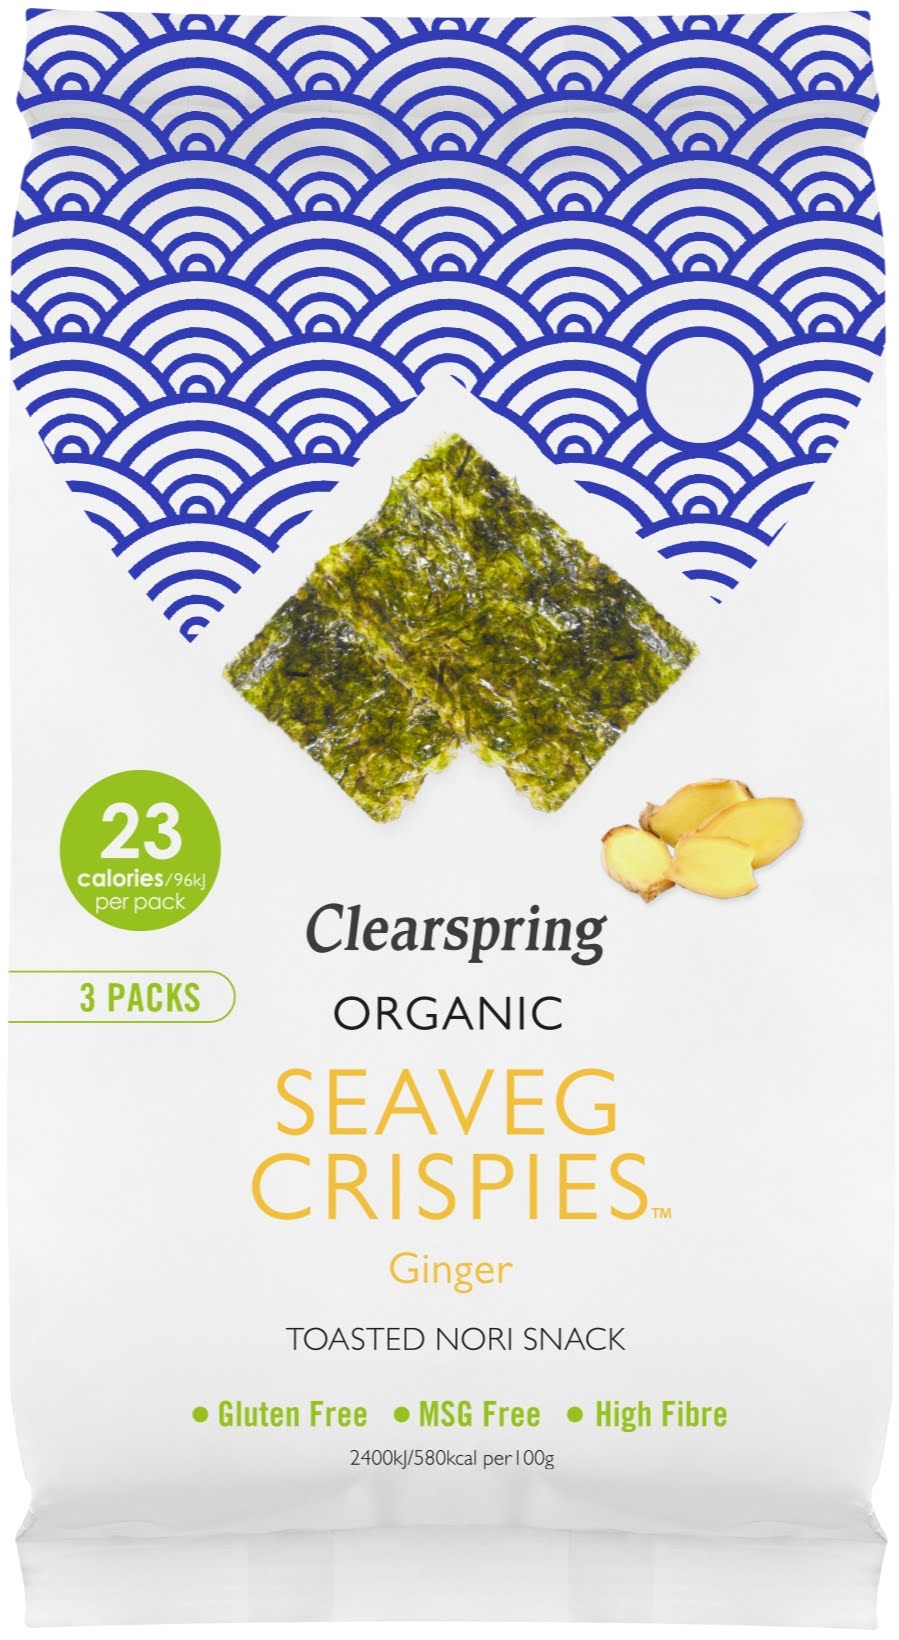 Toasted Nori Snack - Ingwer (Multipack, 3x4g)